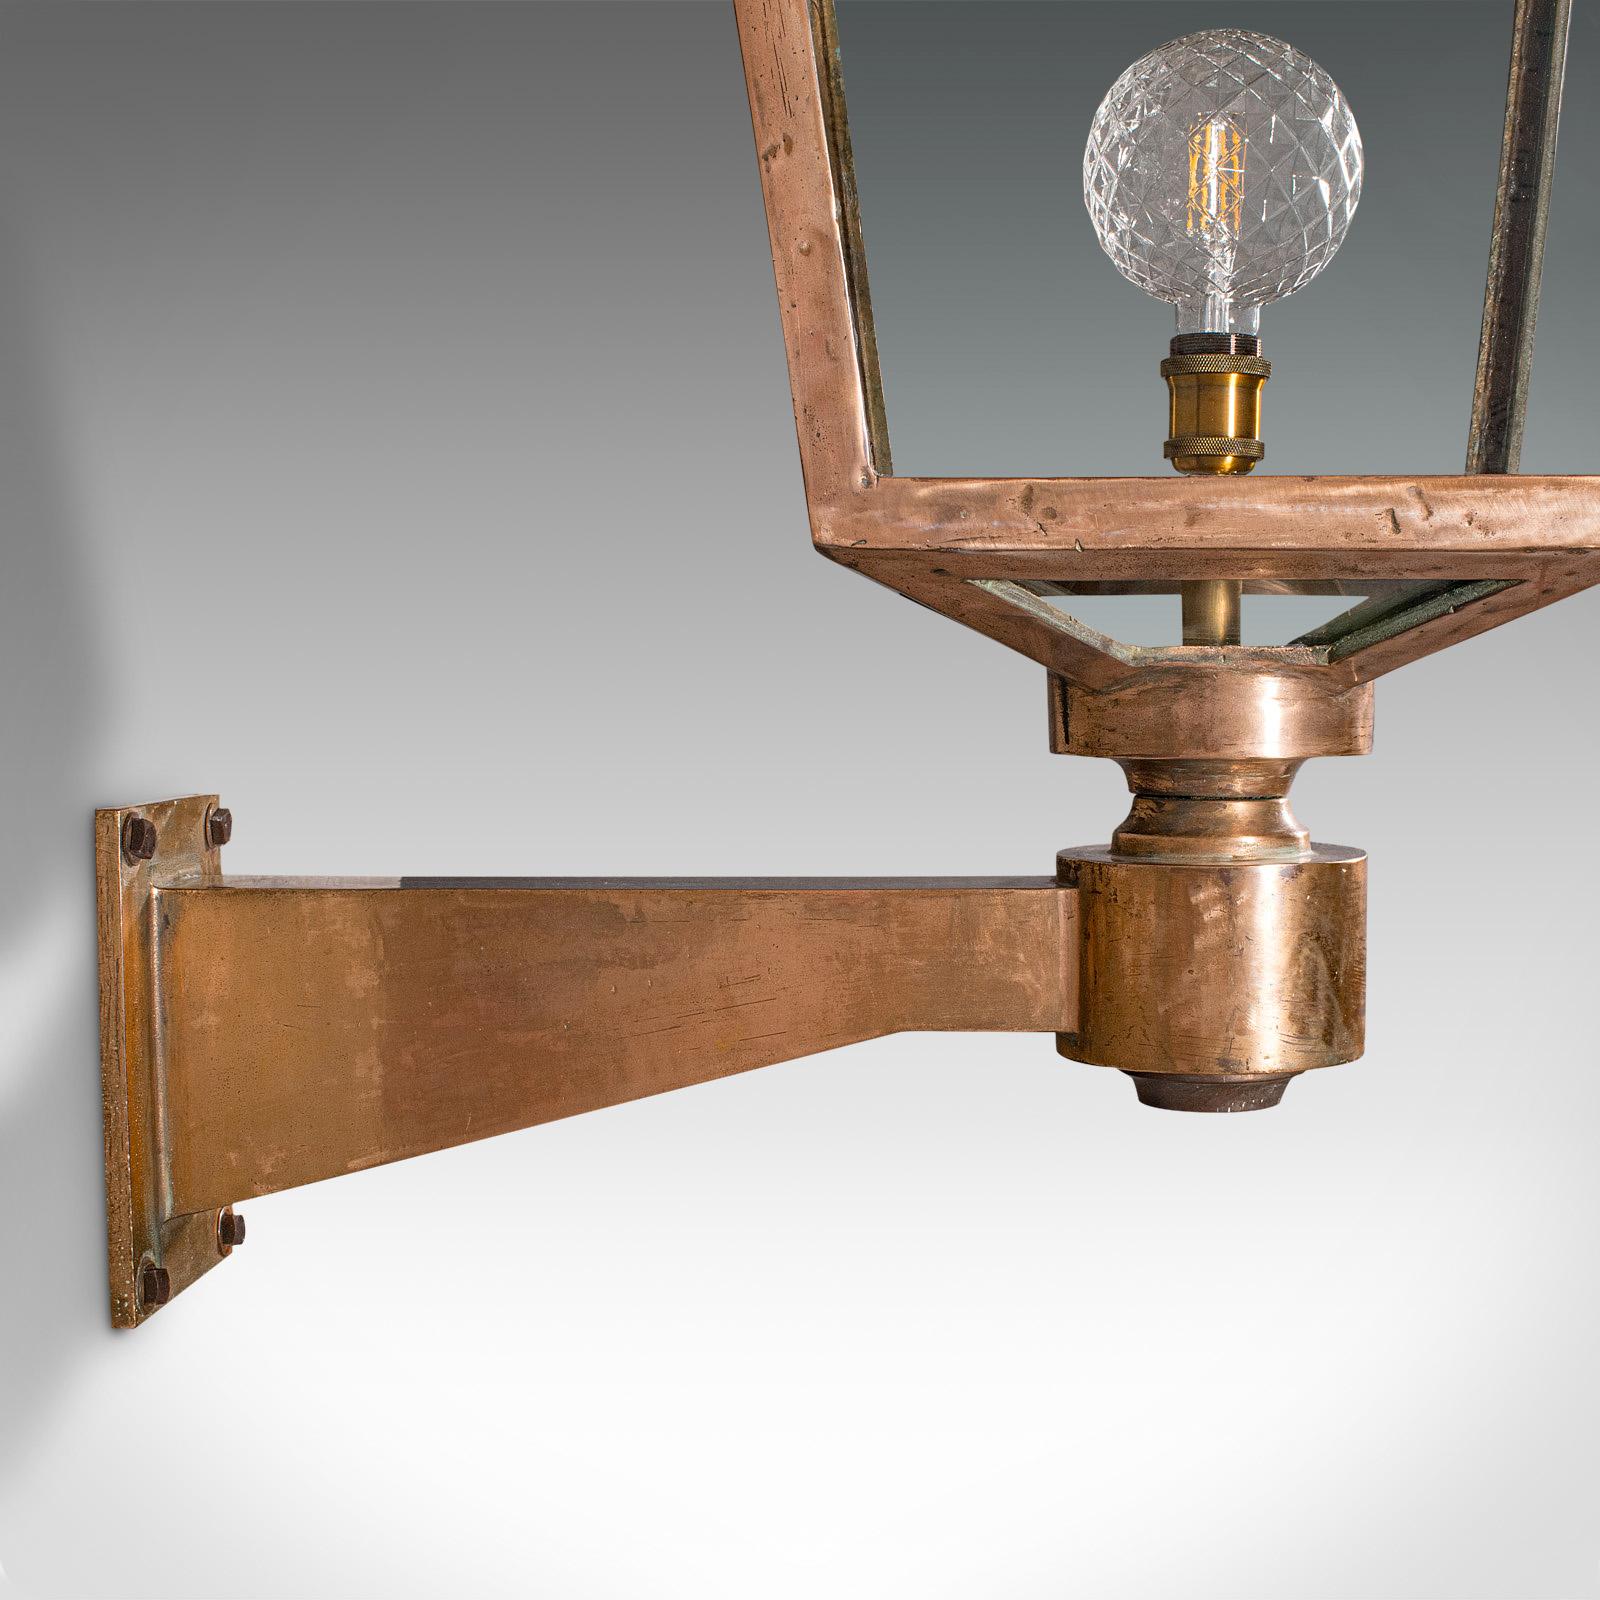 Large Antique Courtyard Light, English, Bronze, Outdoor Lamp, Victorian, C.1870 For Sale 2